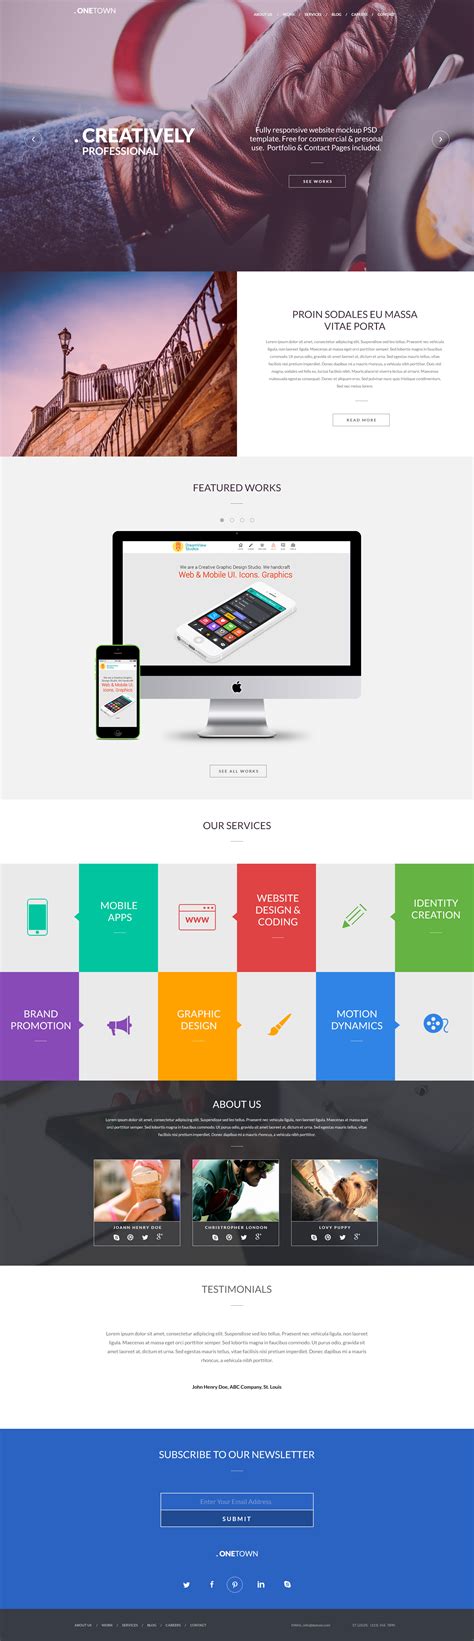 Free Responsive Website PSD Templates - GraphicsFuel